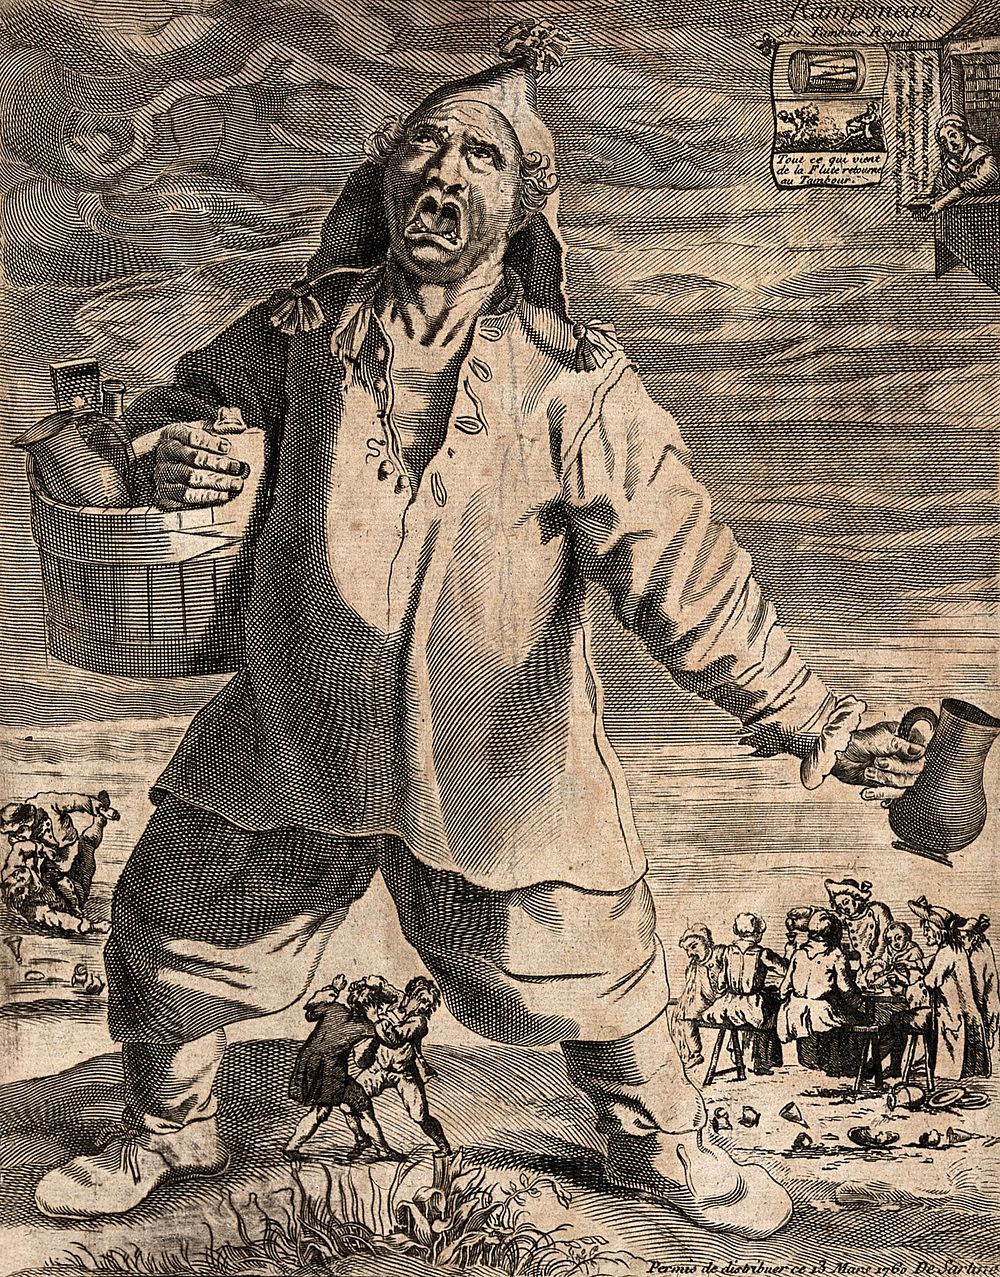 A large man carrying a tankard and a wooden half-barrel is singing, representing Jean Ramponneau and his drinking…